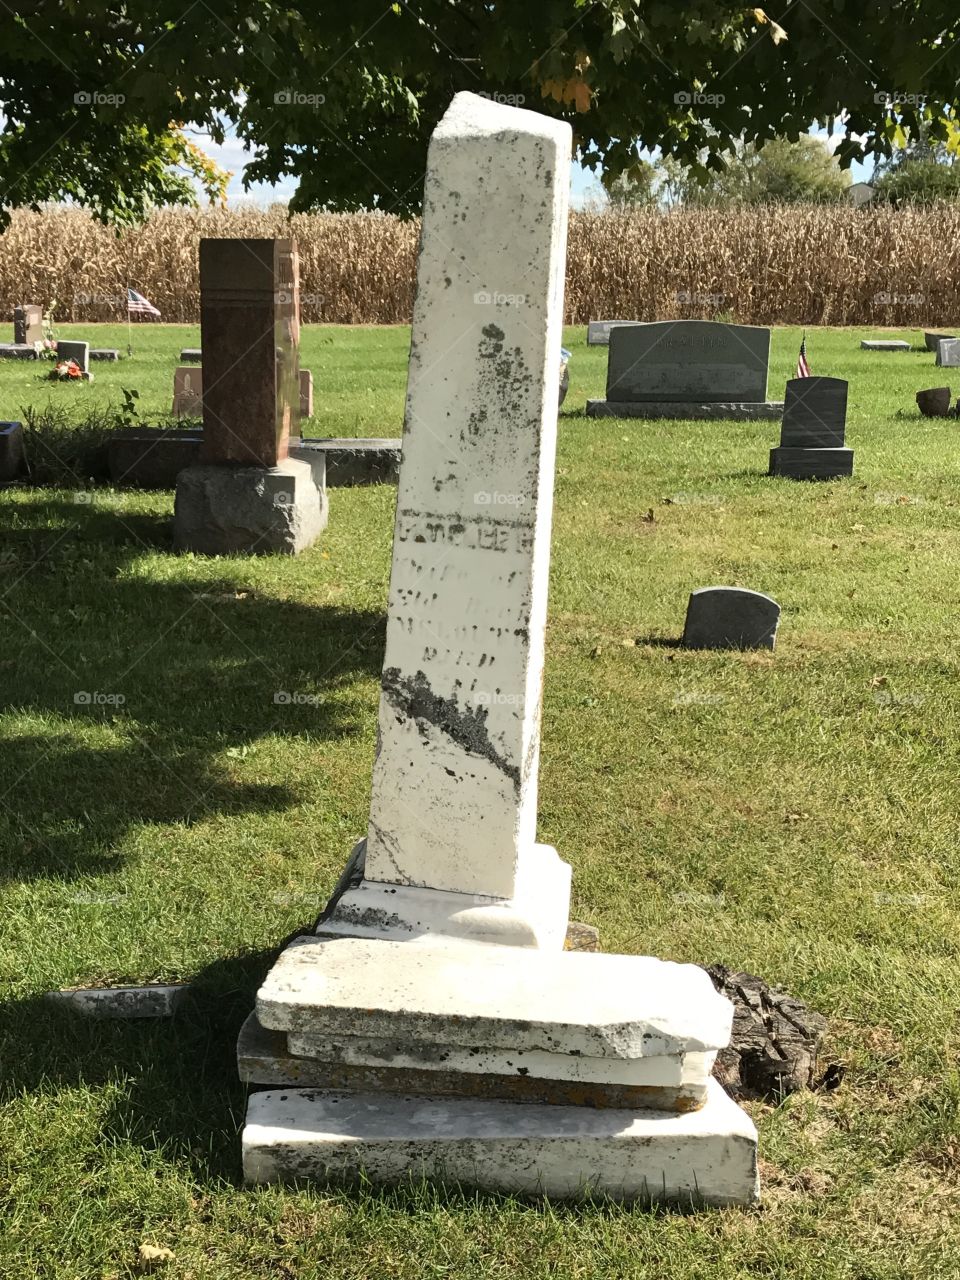 Very old monument with a stack of headstones in front.